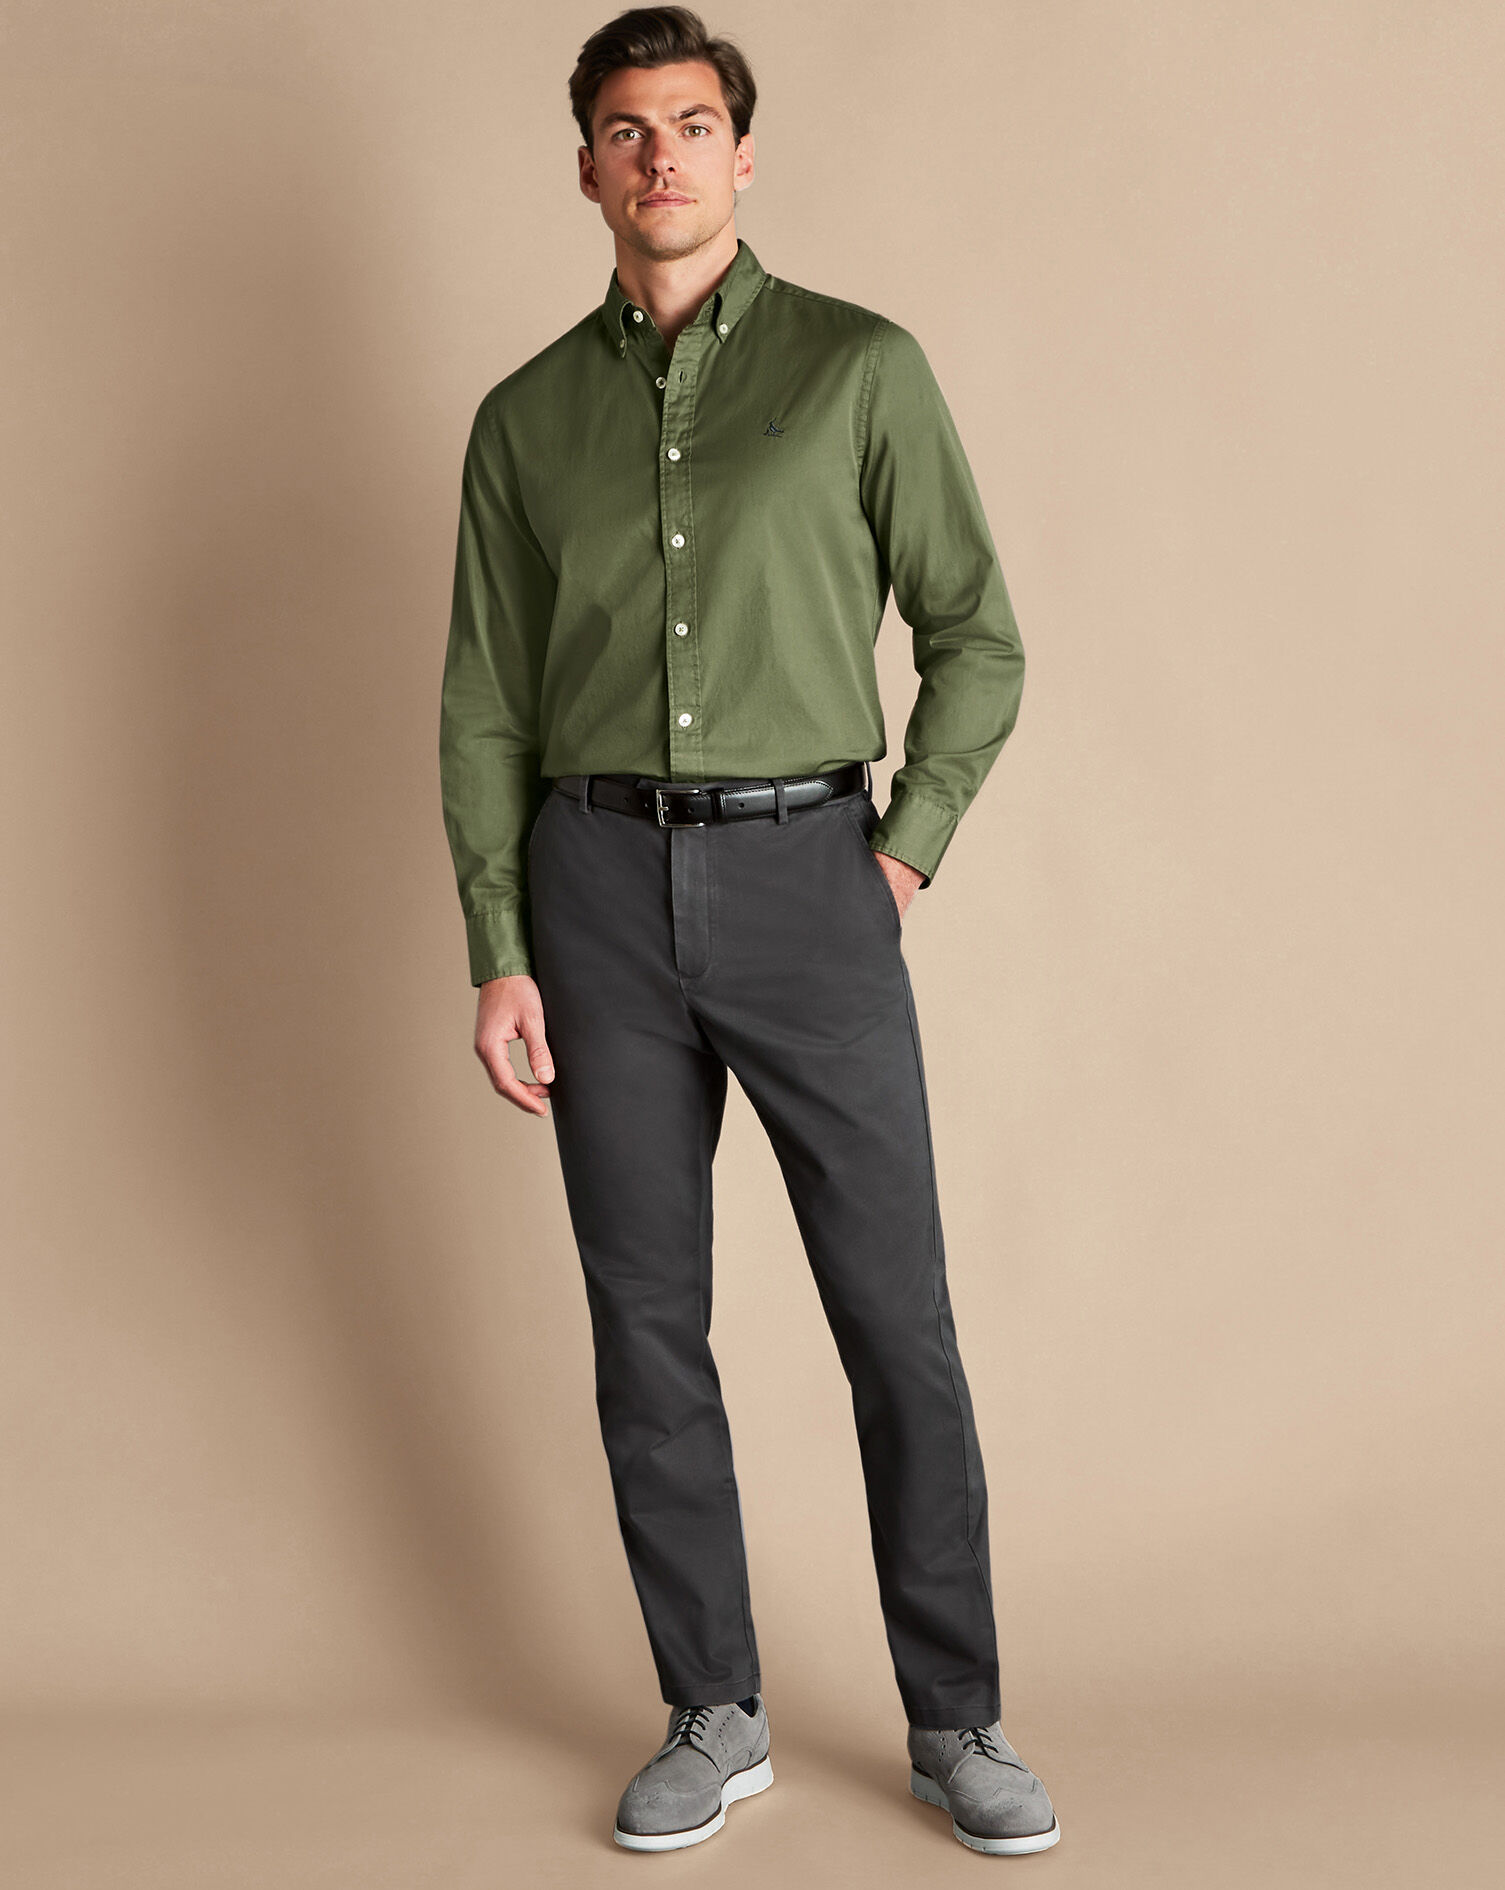 What Color Shirt Goes With Dark Brown Pants Men Guys Light Pink Shirt  Fashion Inspiration Outfit | Brown pants men, Green trousers outfit, Dark  brown pants